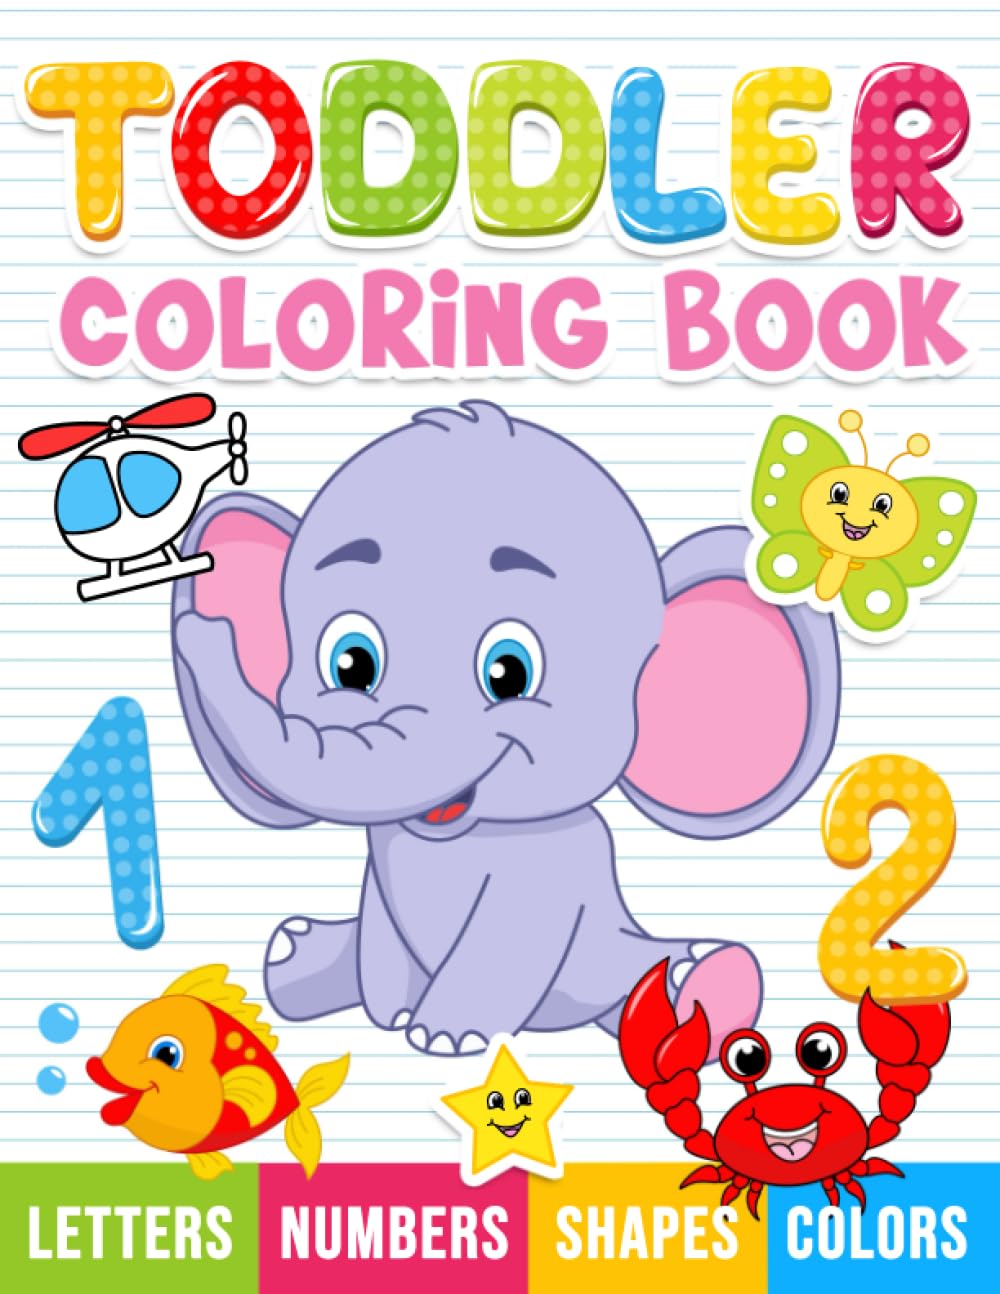 Toddler Coloring Book: Numbers, Letters, Shapes and Animals, Coloring Book for kids, Age 1-3, Preschool Coloring Book